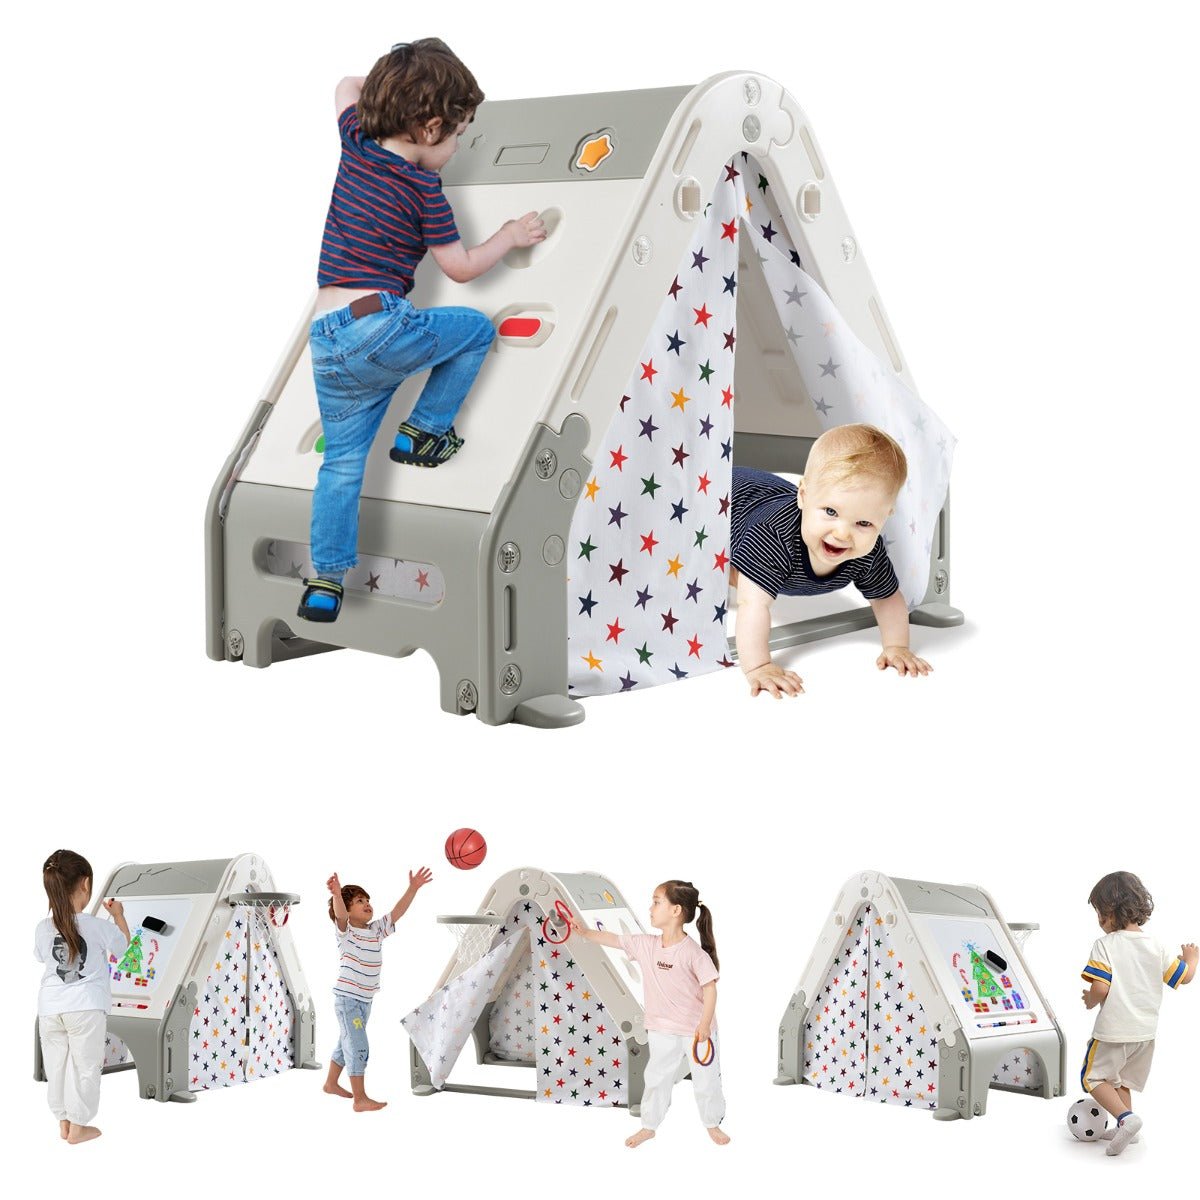 Kids Adventure Zone: Triangle Climber with Tent, White Board & Sports